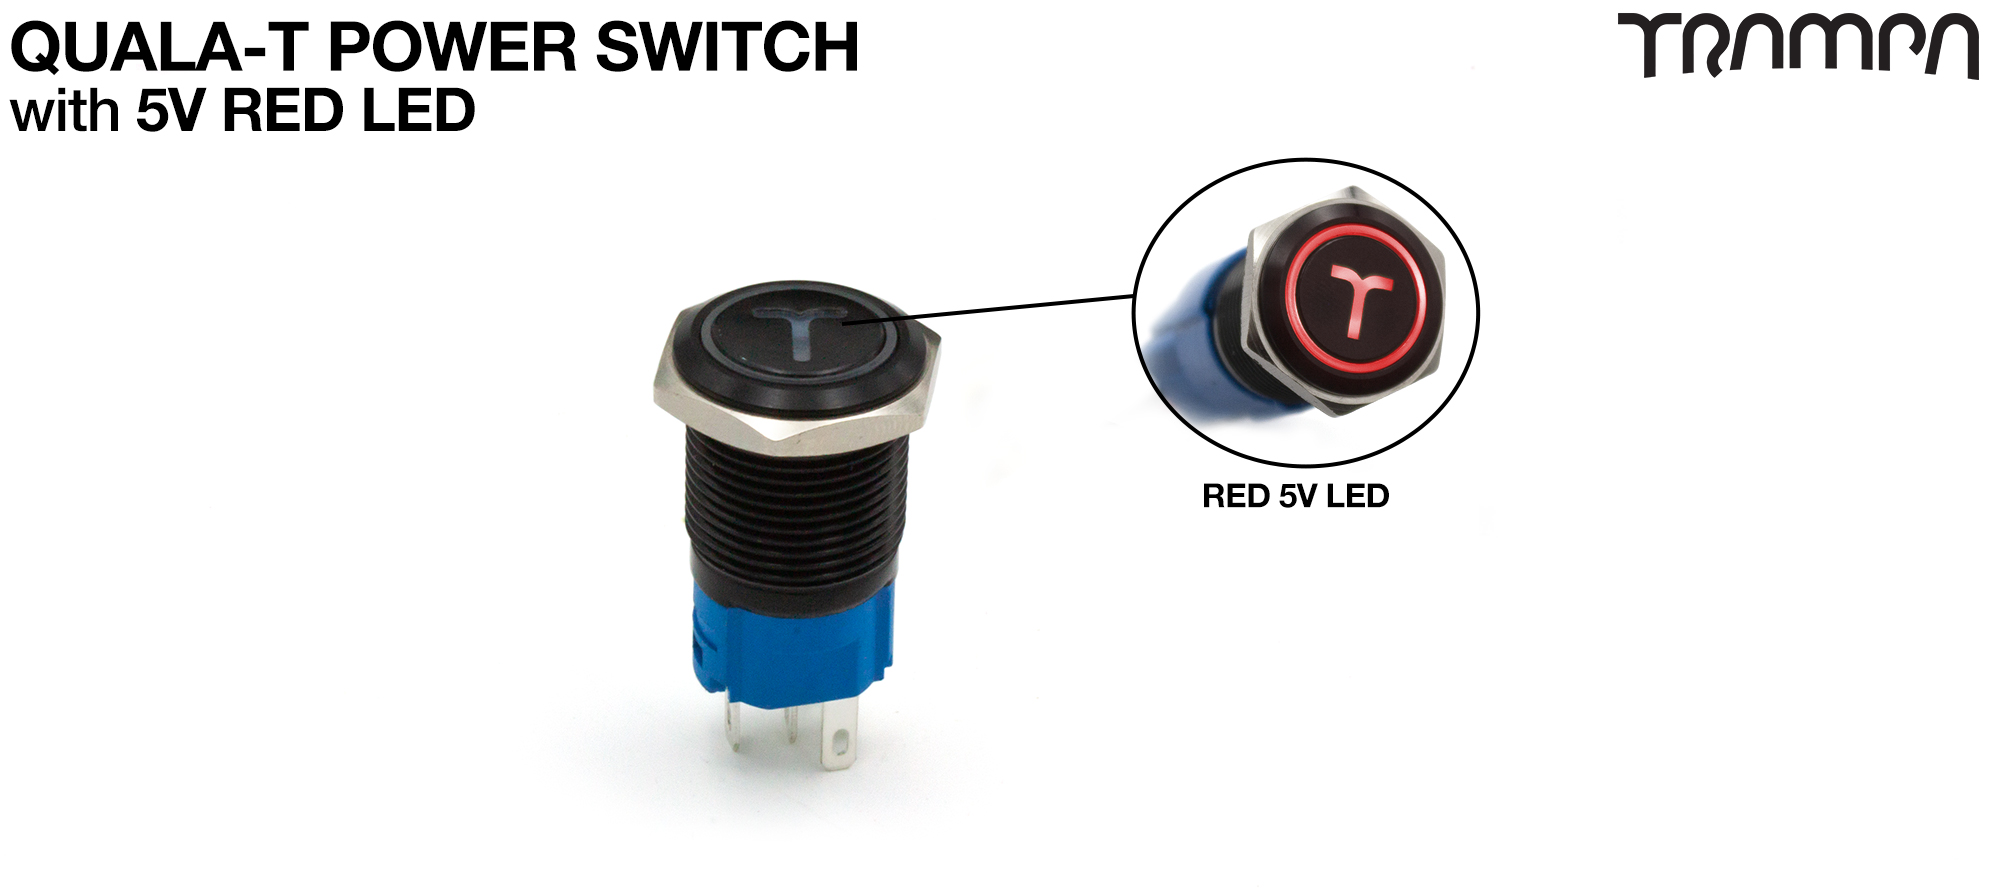 TRAMPA Switch with 5V RED LED QUALA-T & 16mm Stainless Steel Fixing Nut  